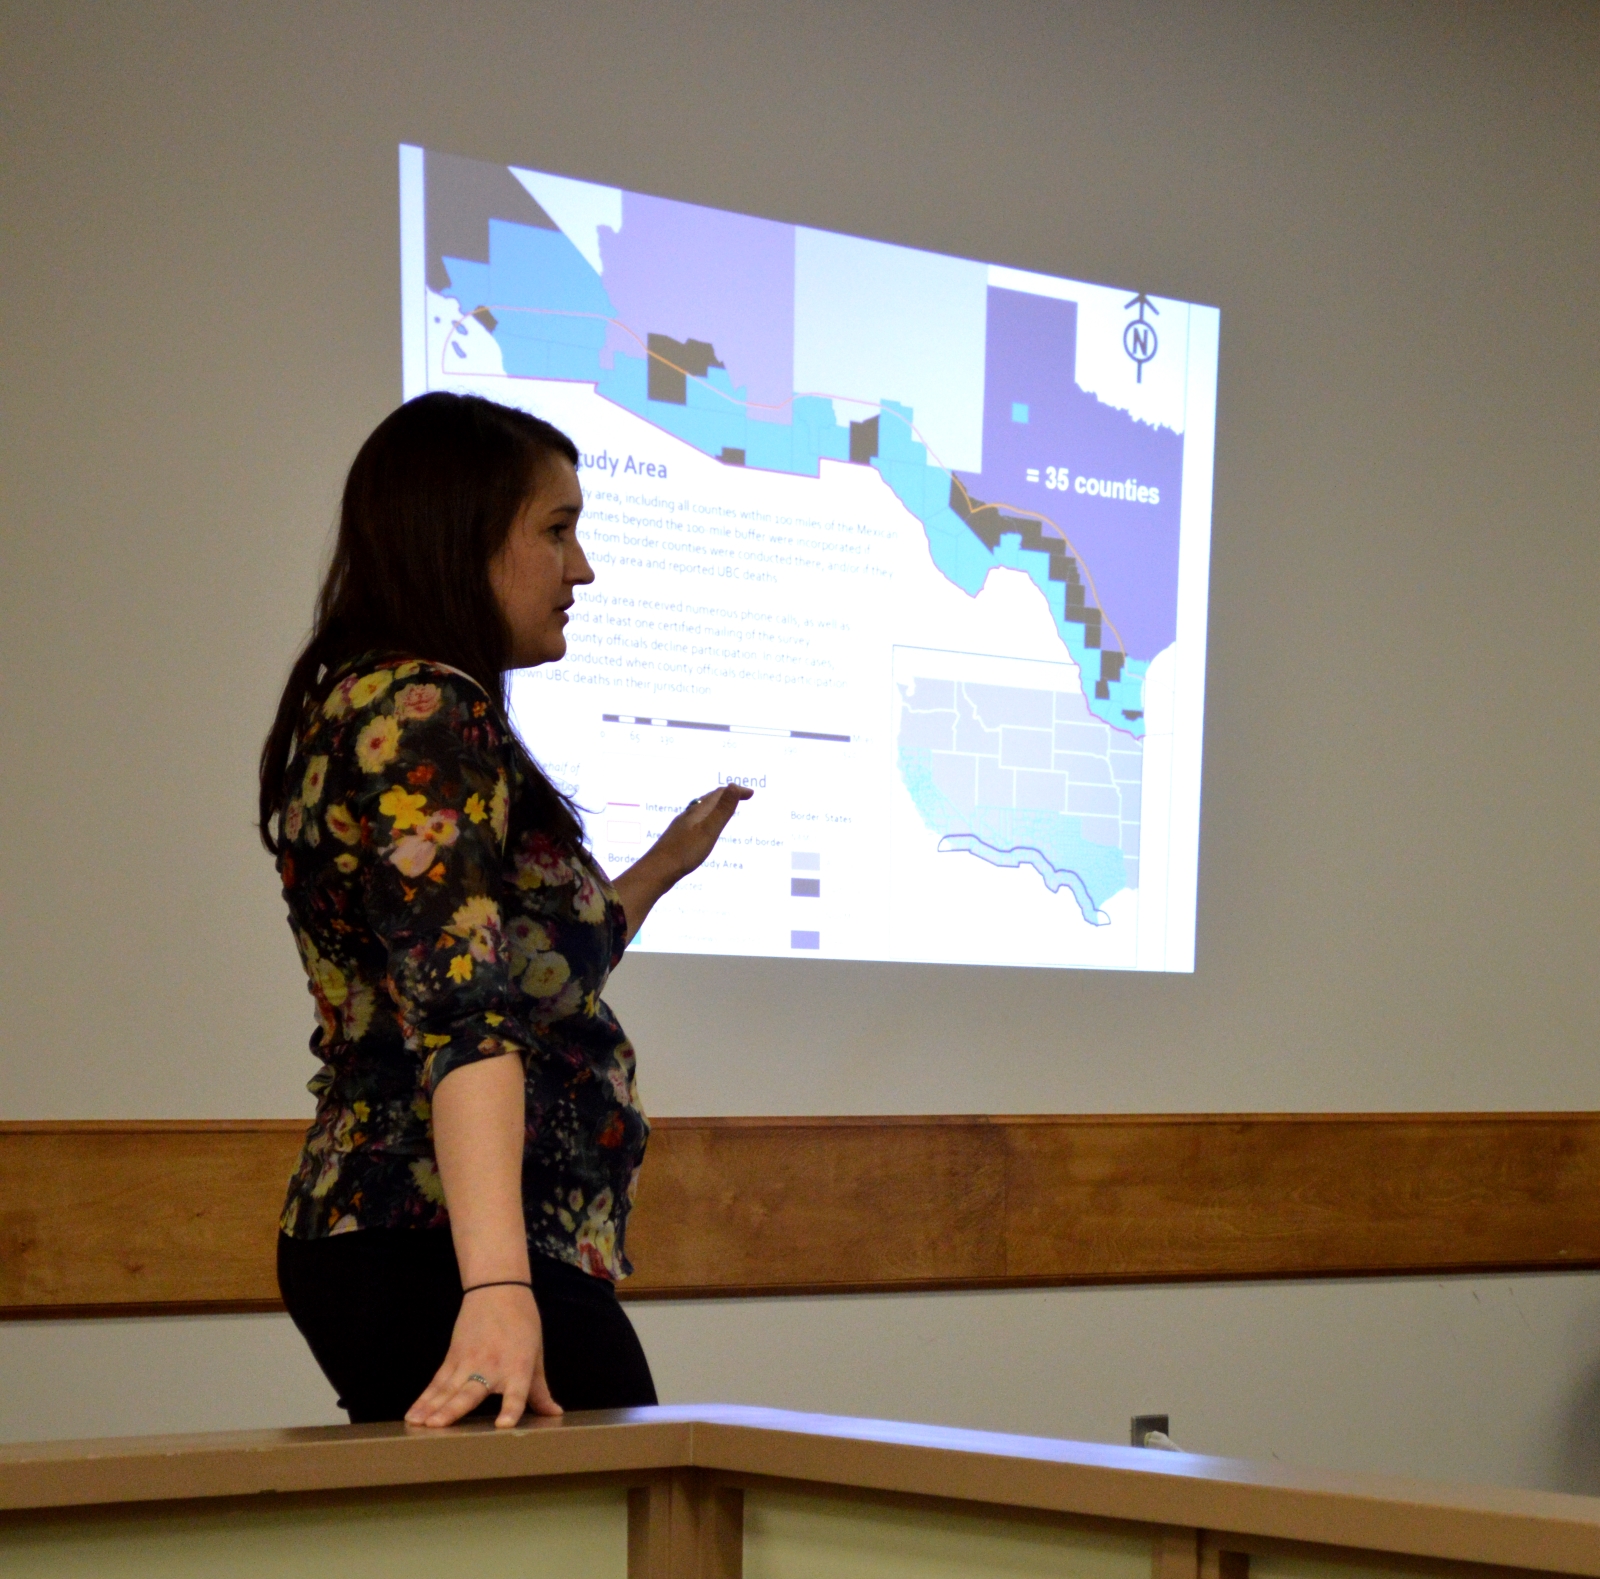 Hailey Duecker giving a presentation infront of a powerpoint depicting the Texas US border